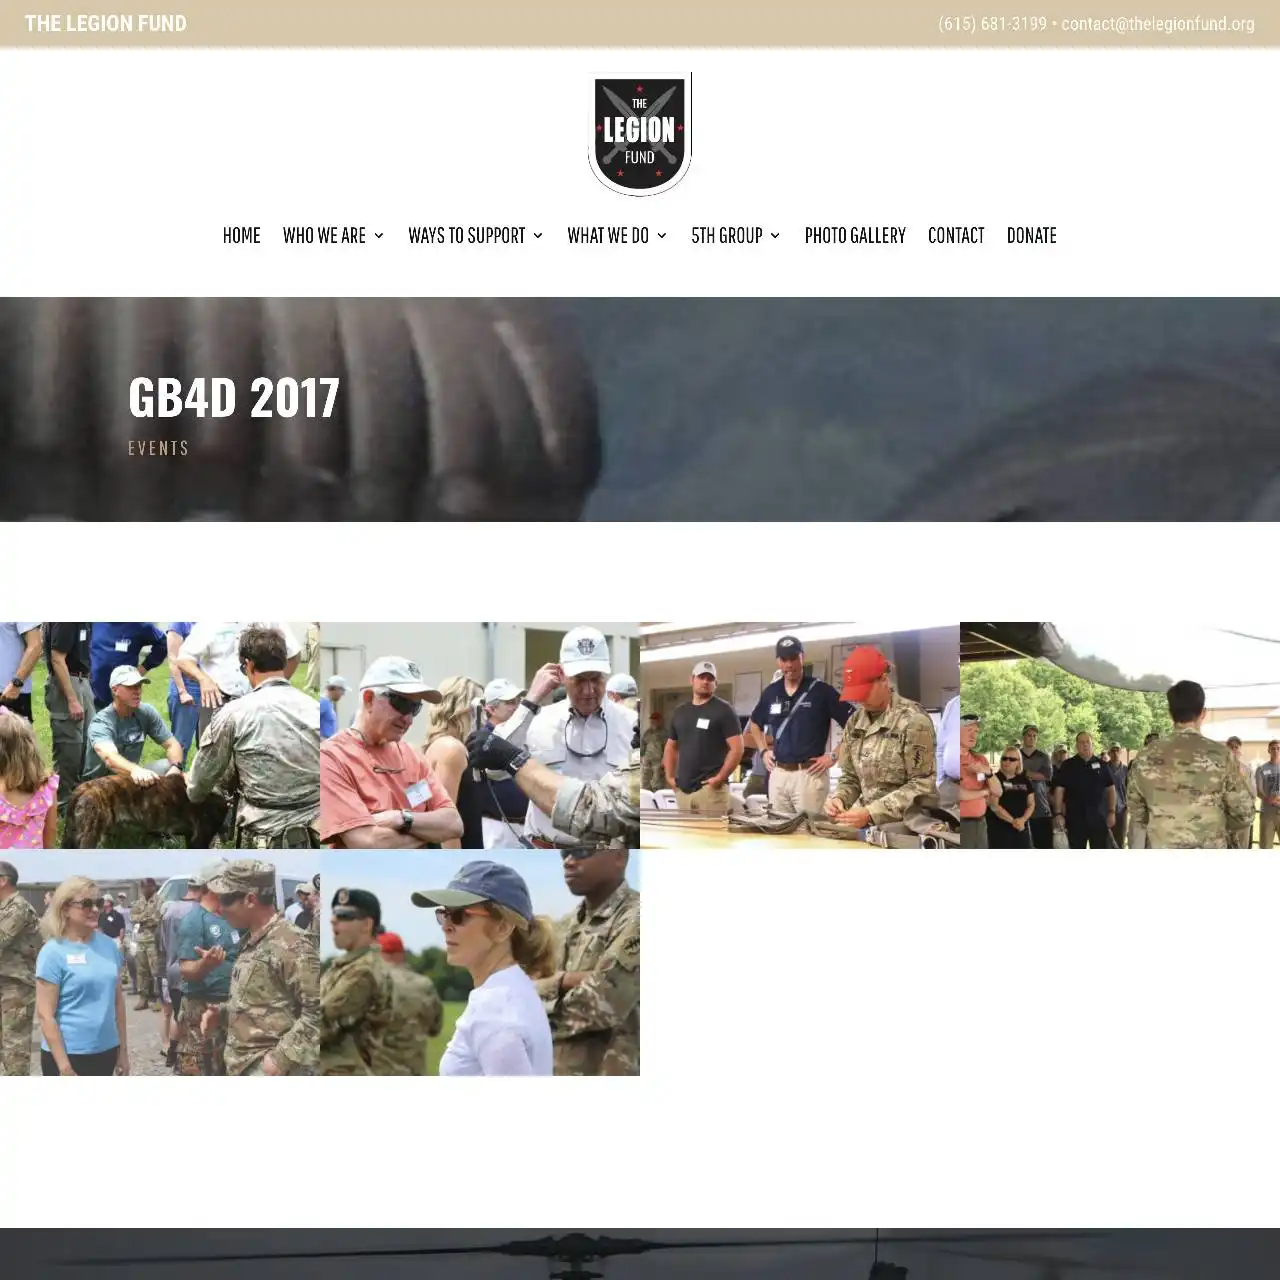 https thelegionfund.org events gb4d 2017